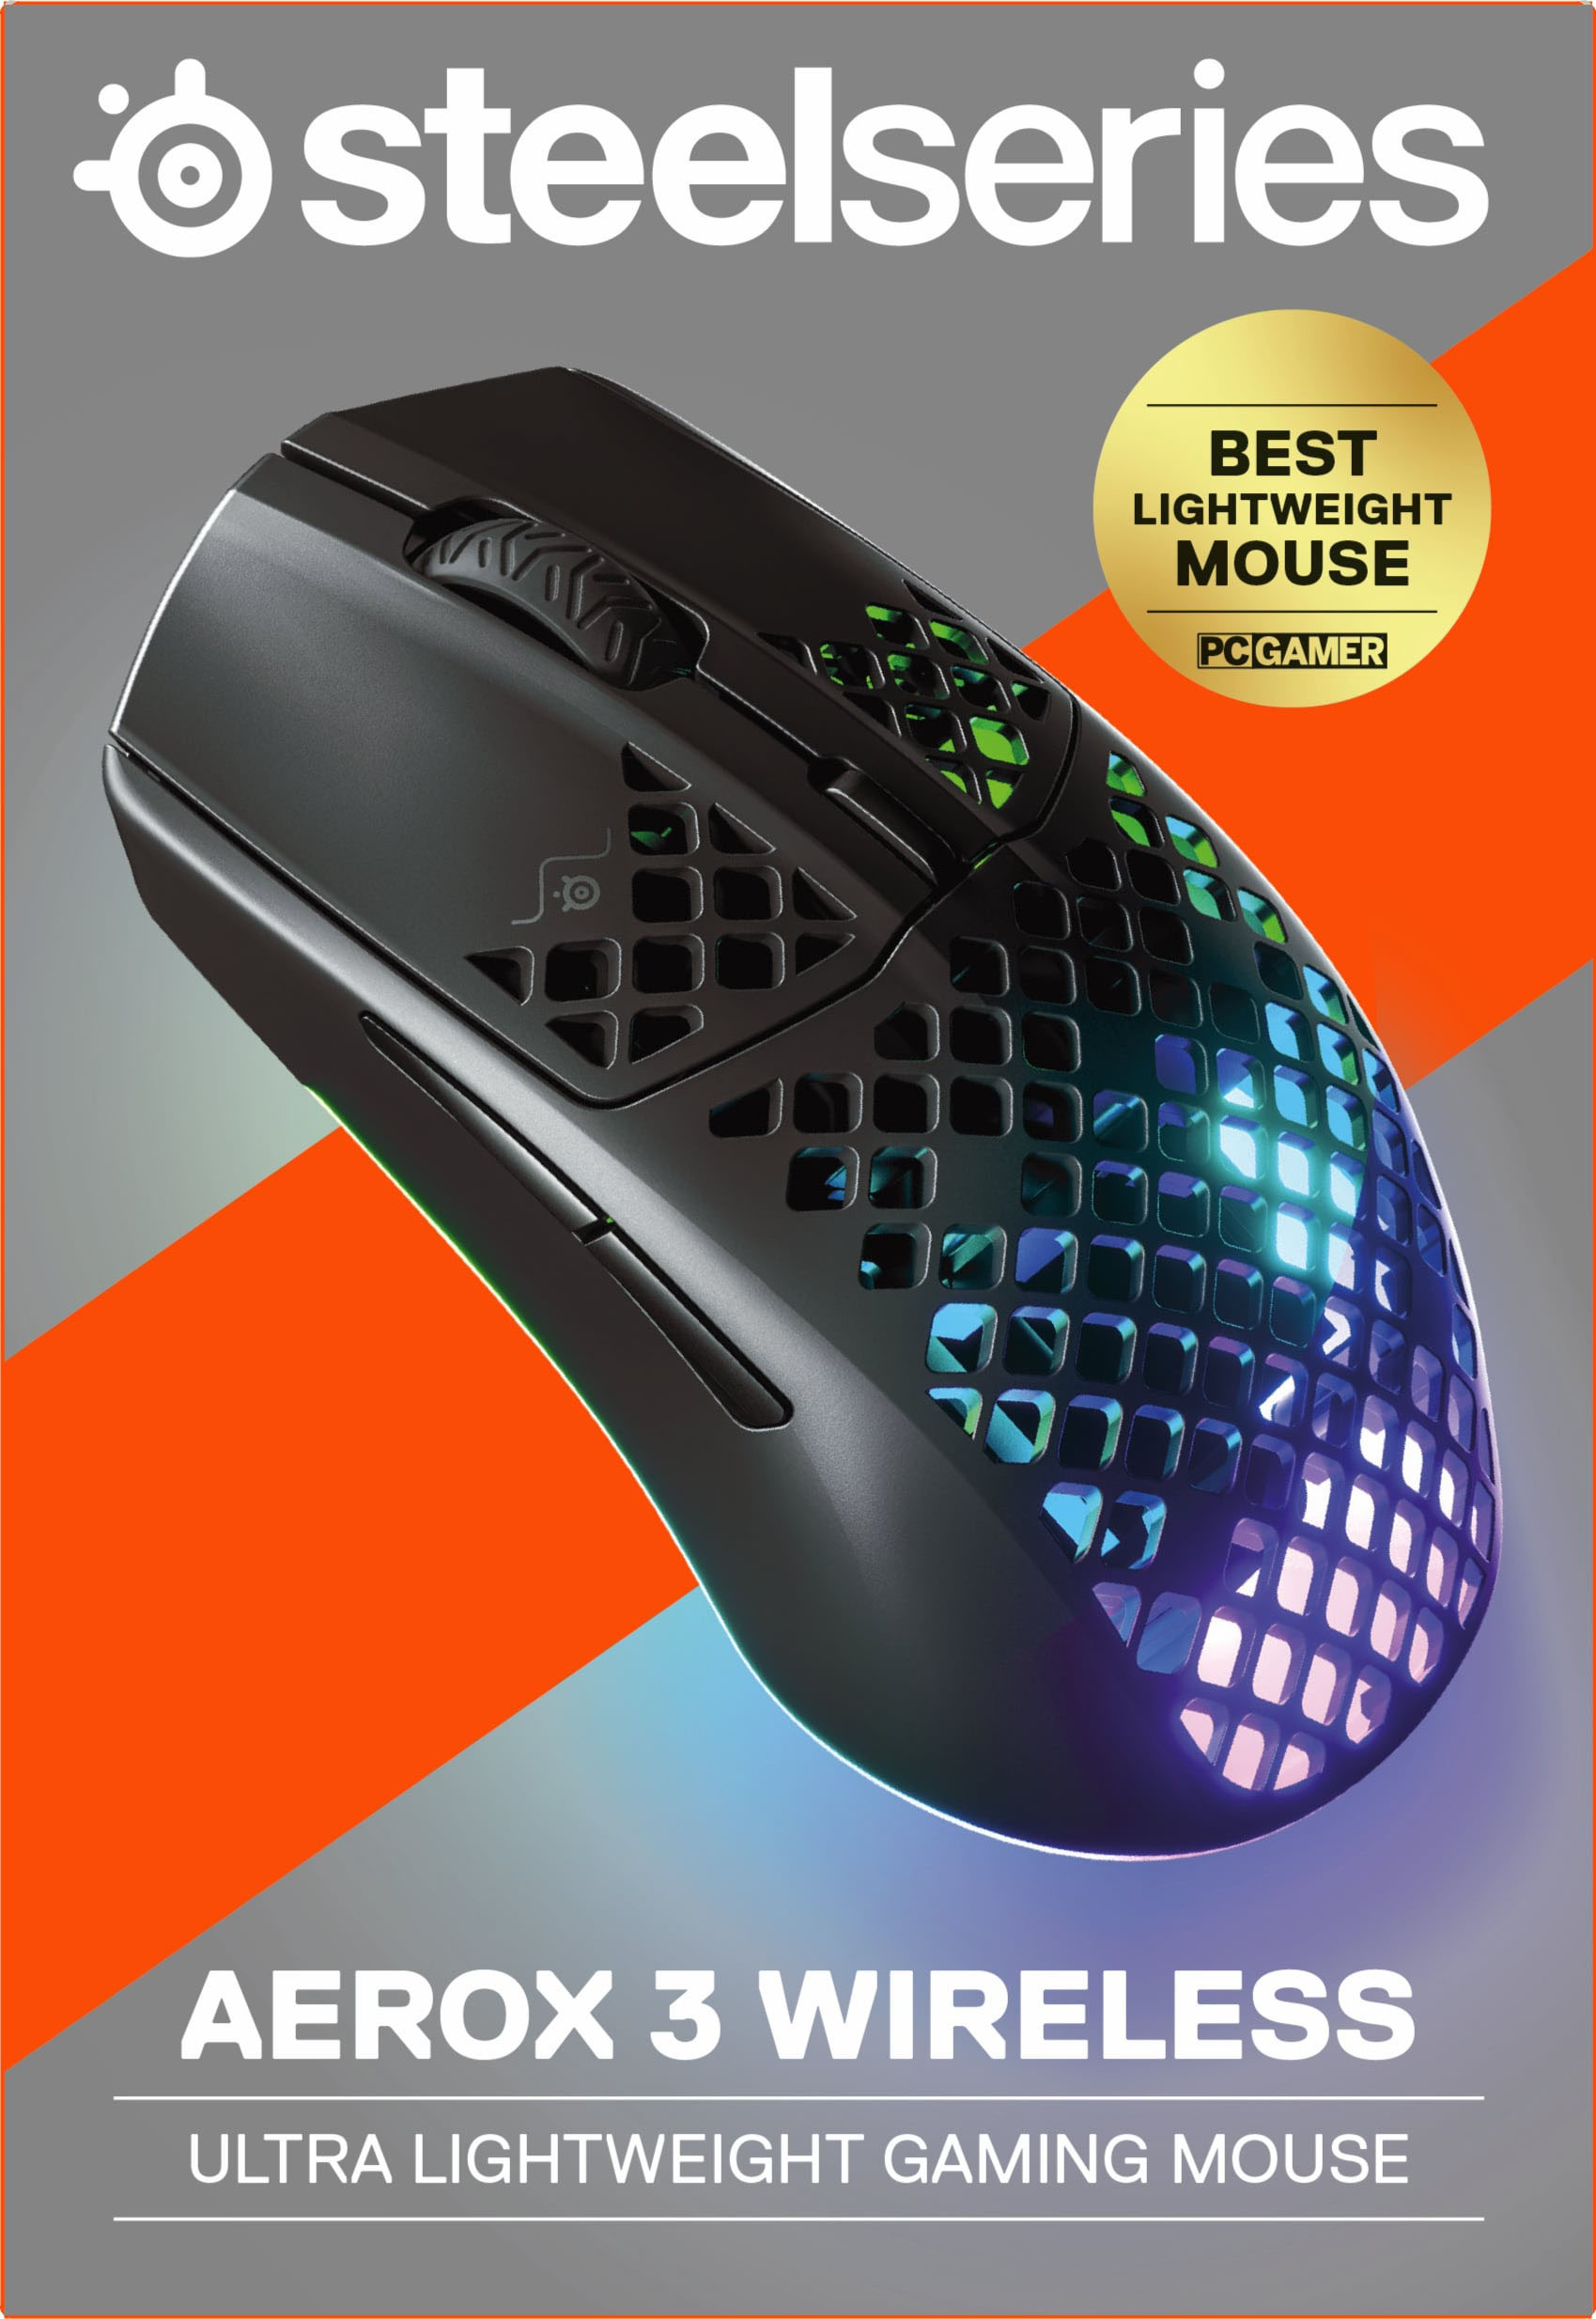 Light Best Honeycomb Buy 62612 Onyx Optical Wireless 3 Super Mouse SteelSeries Gaming - Aerox RGB